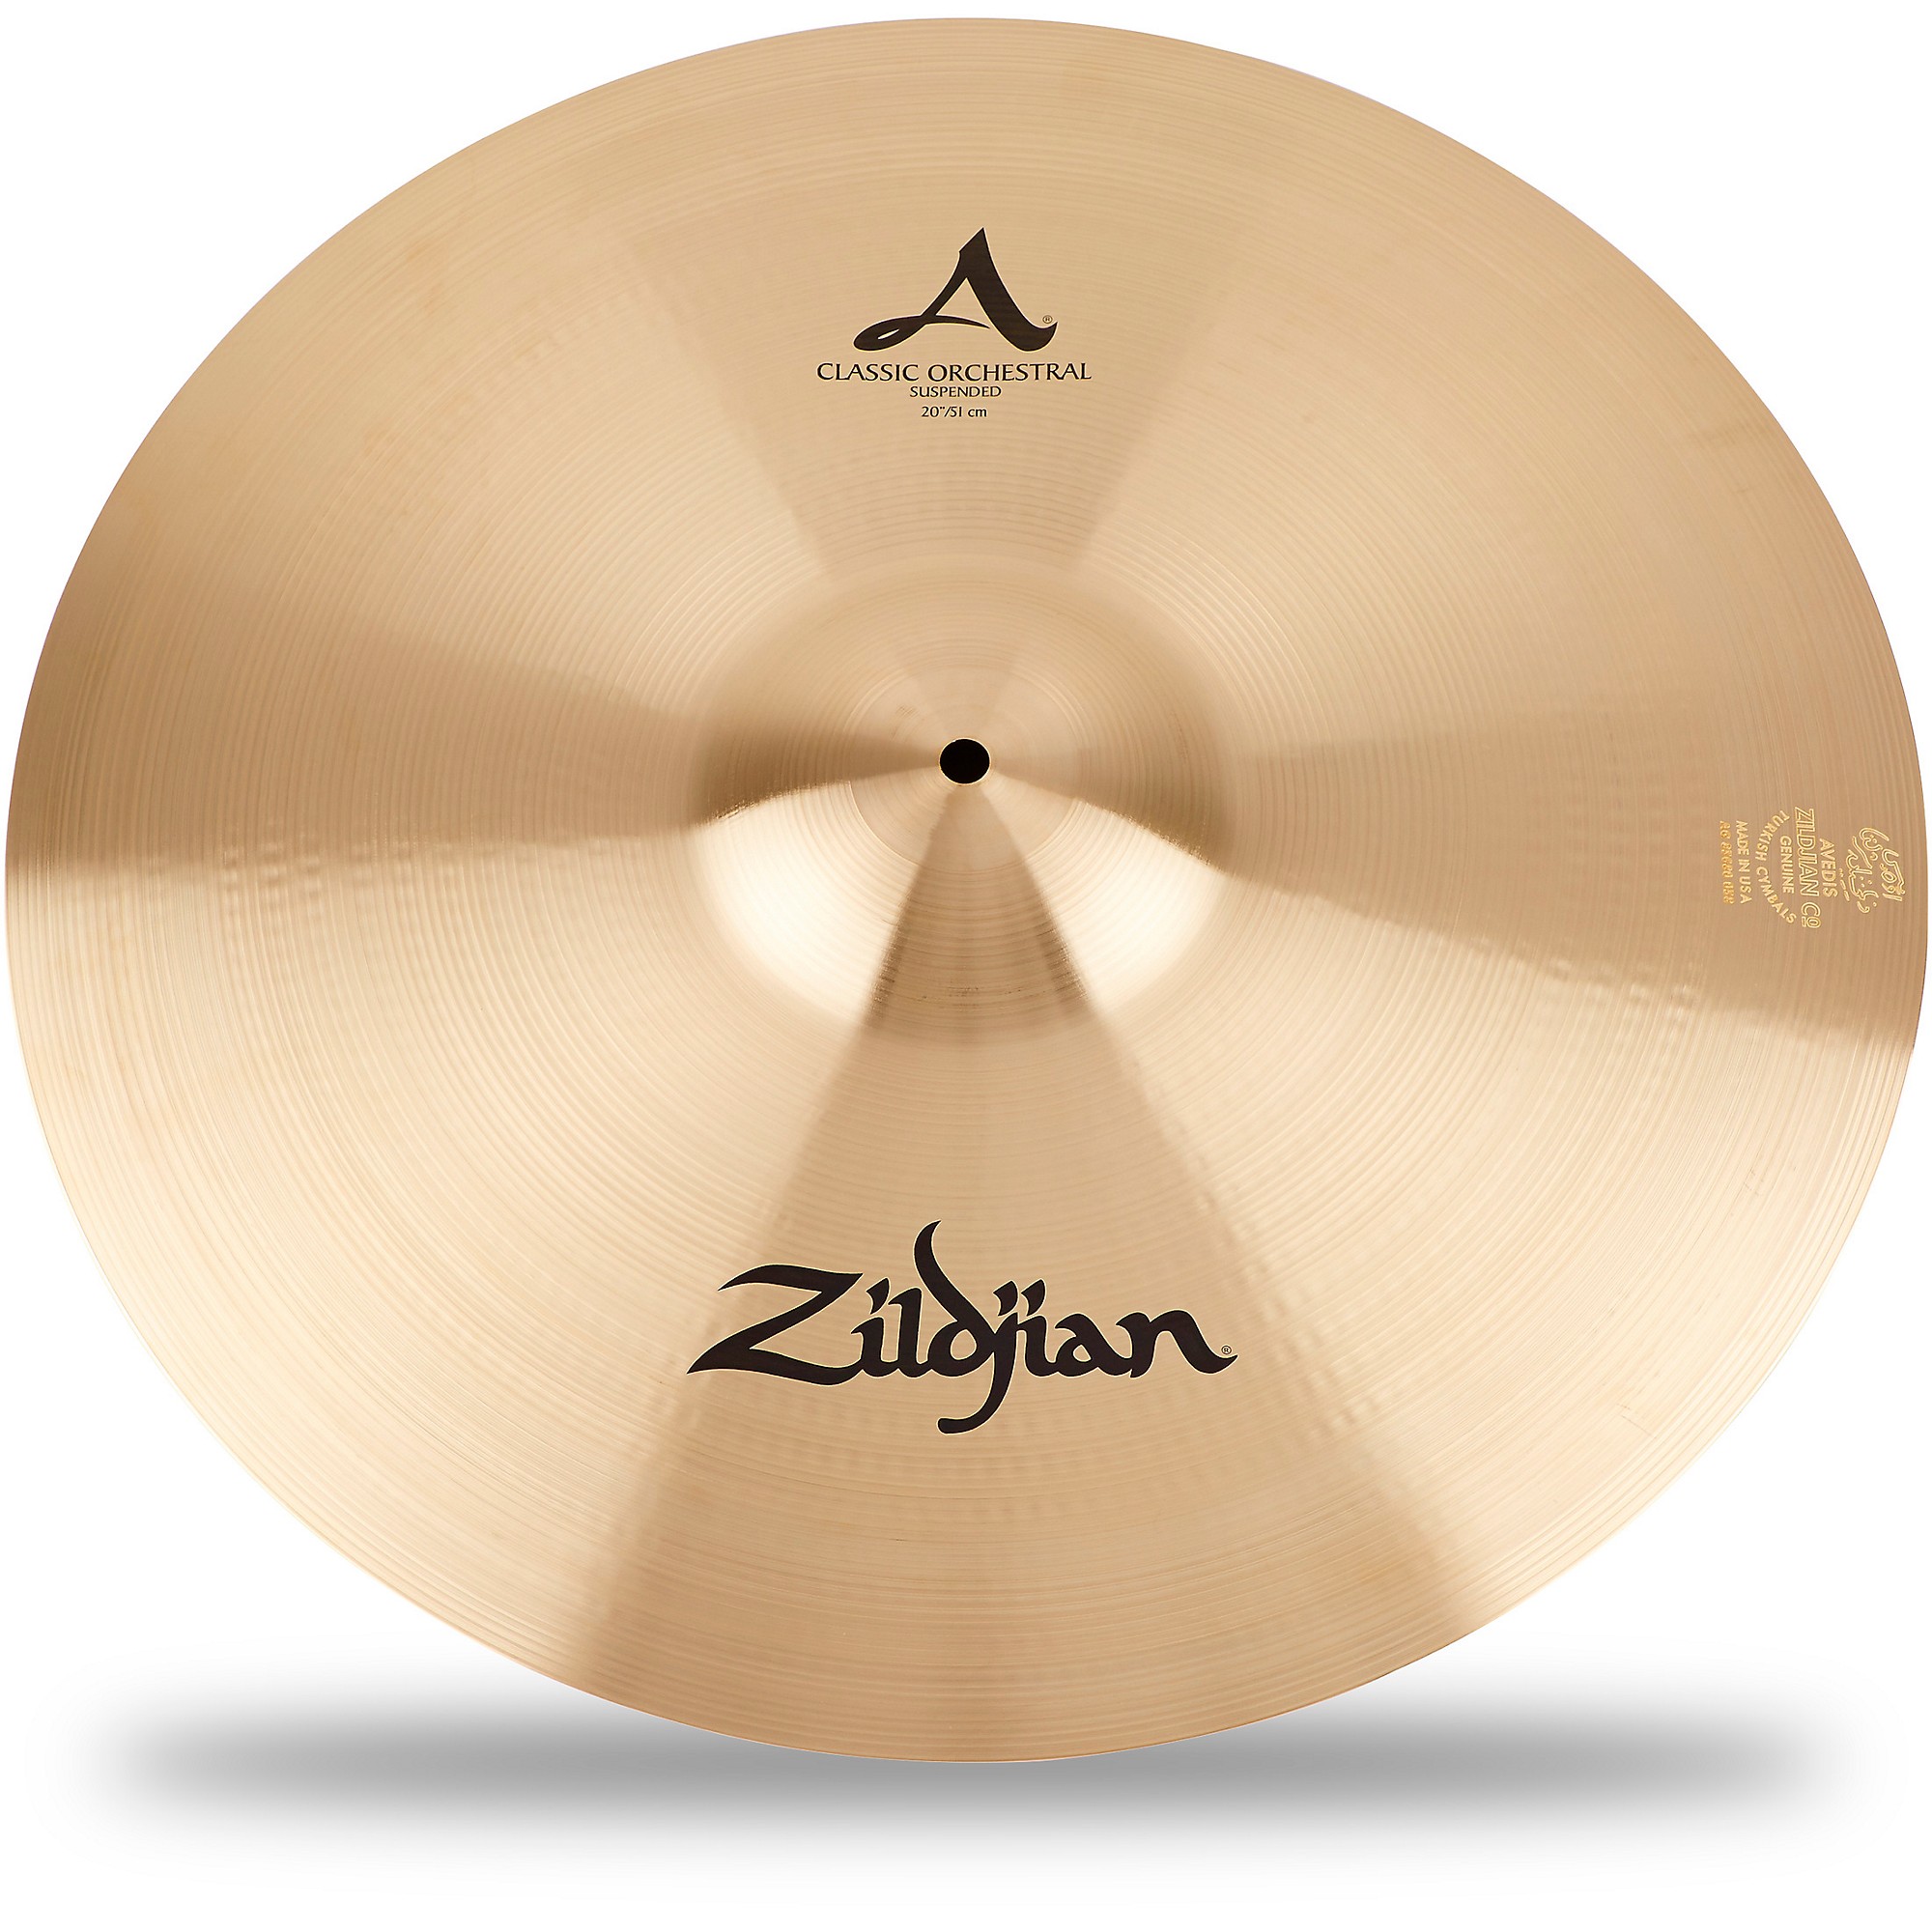 Zildjian Classic Orchestral Selection Suspended Cymbal | Music & Arts